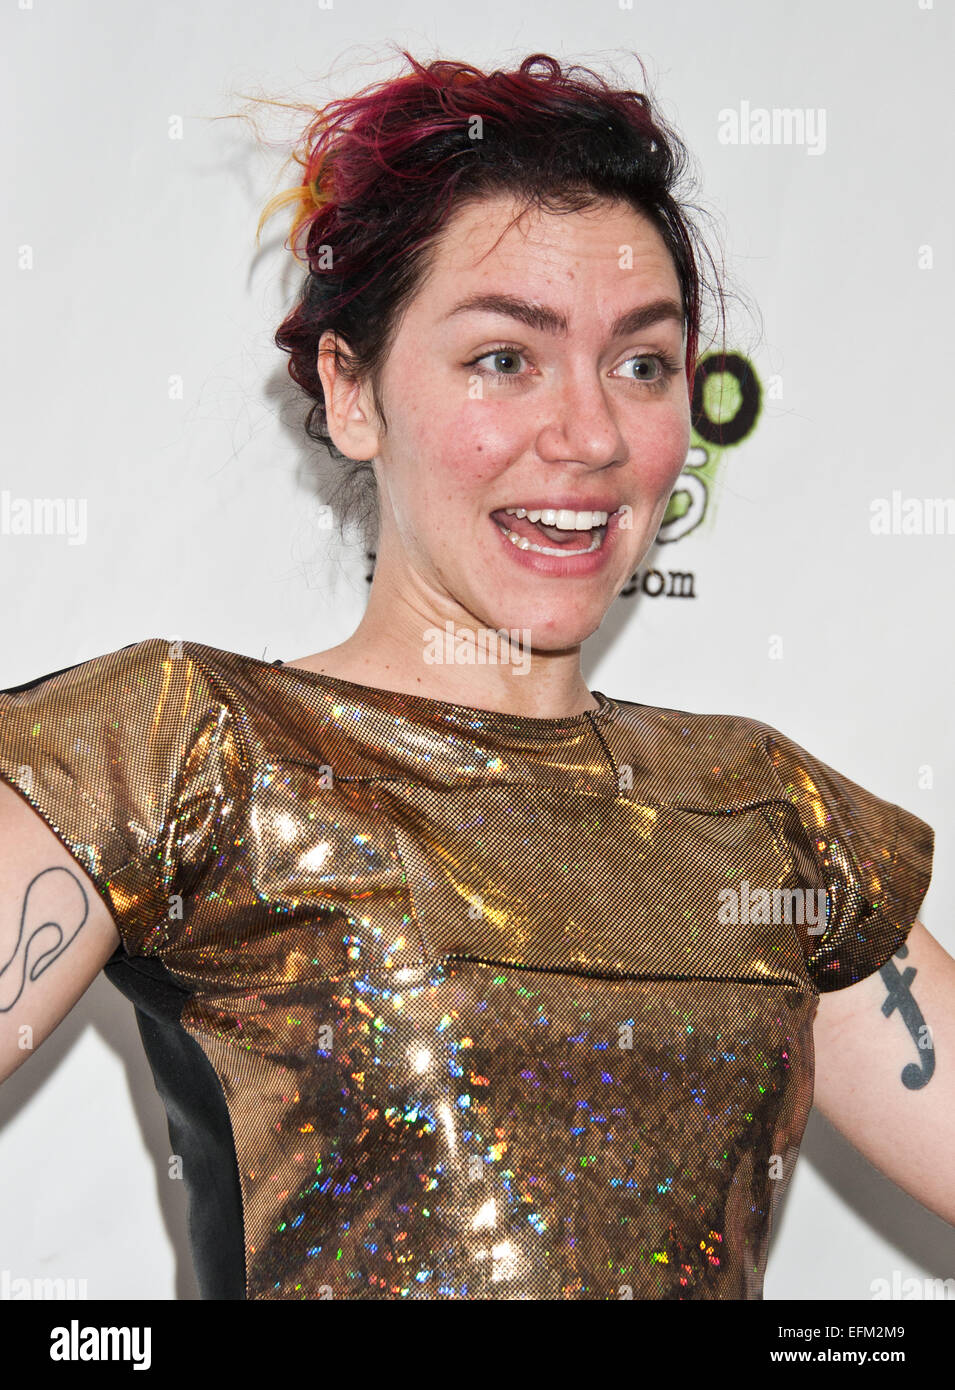 Bala Cynwyd, Pennsylvania, USA. 6th February, 2015. American Indie Pop Singer-Songwriter Genevieve Poses at Radio 104.5's Performance Theatre on February 06, 2015 in Bala Cynwyd, Pennsylvania, United States. Credit:  Paul Froggatt/Alamy Live News Stock Photo